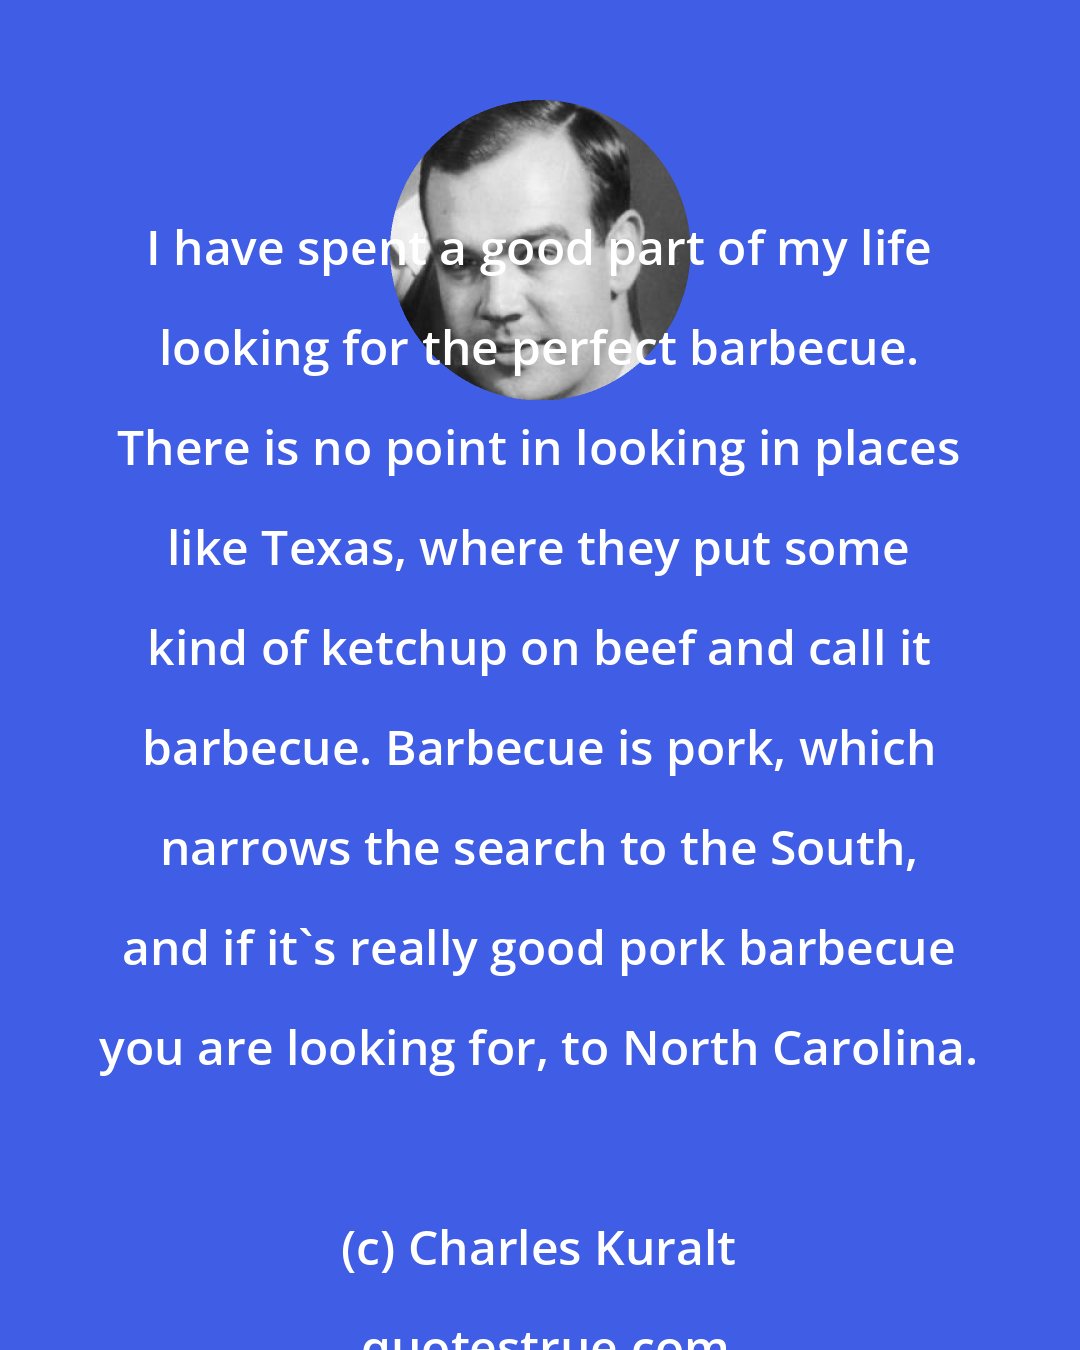 Charles Kuralt: I have spent a good part of my life looking for the perfect barbecue. There is no point in looking in places like Texas, where they put some kind of ketchup on beef and call it barbecue. Barbecue is pork, which narrows the search to the South, and if it's really good pork barbecue you are looking for, to North Carolina.